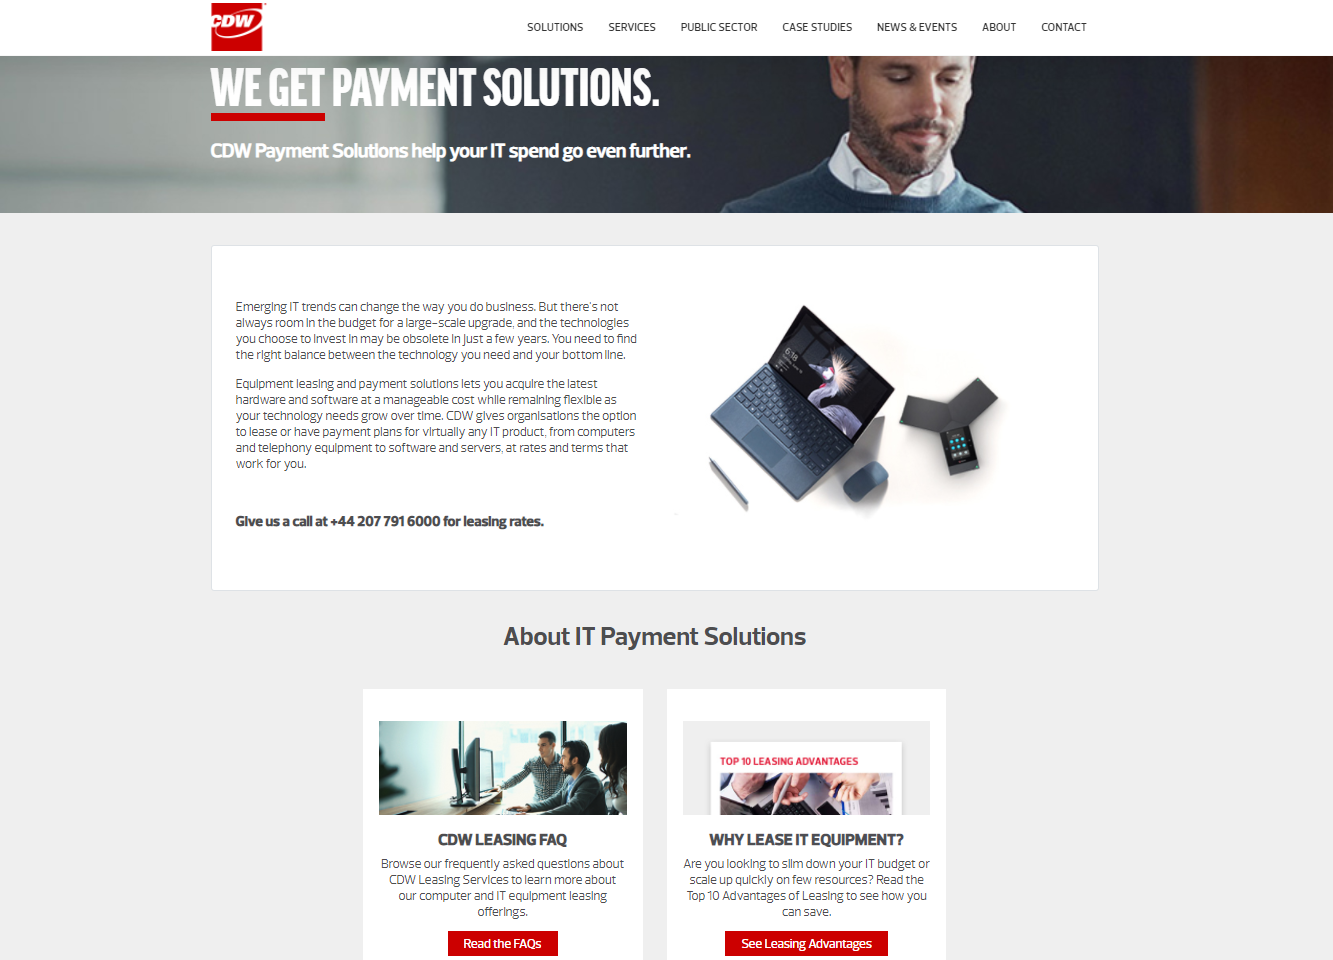 CDW web content - payment solutions